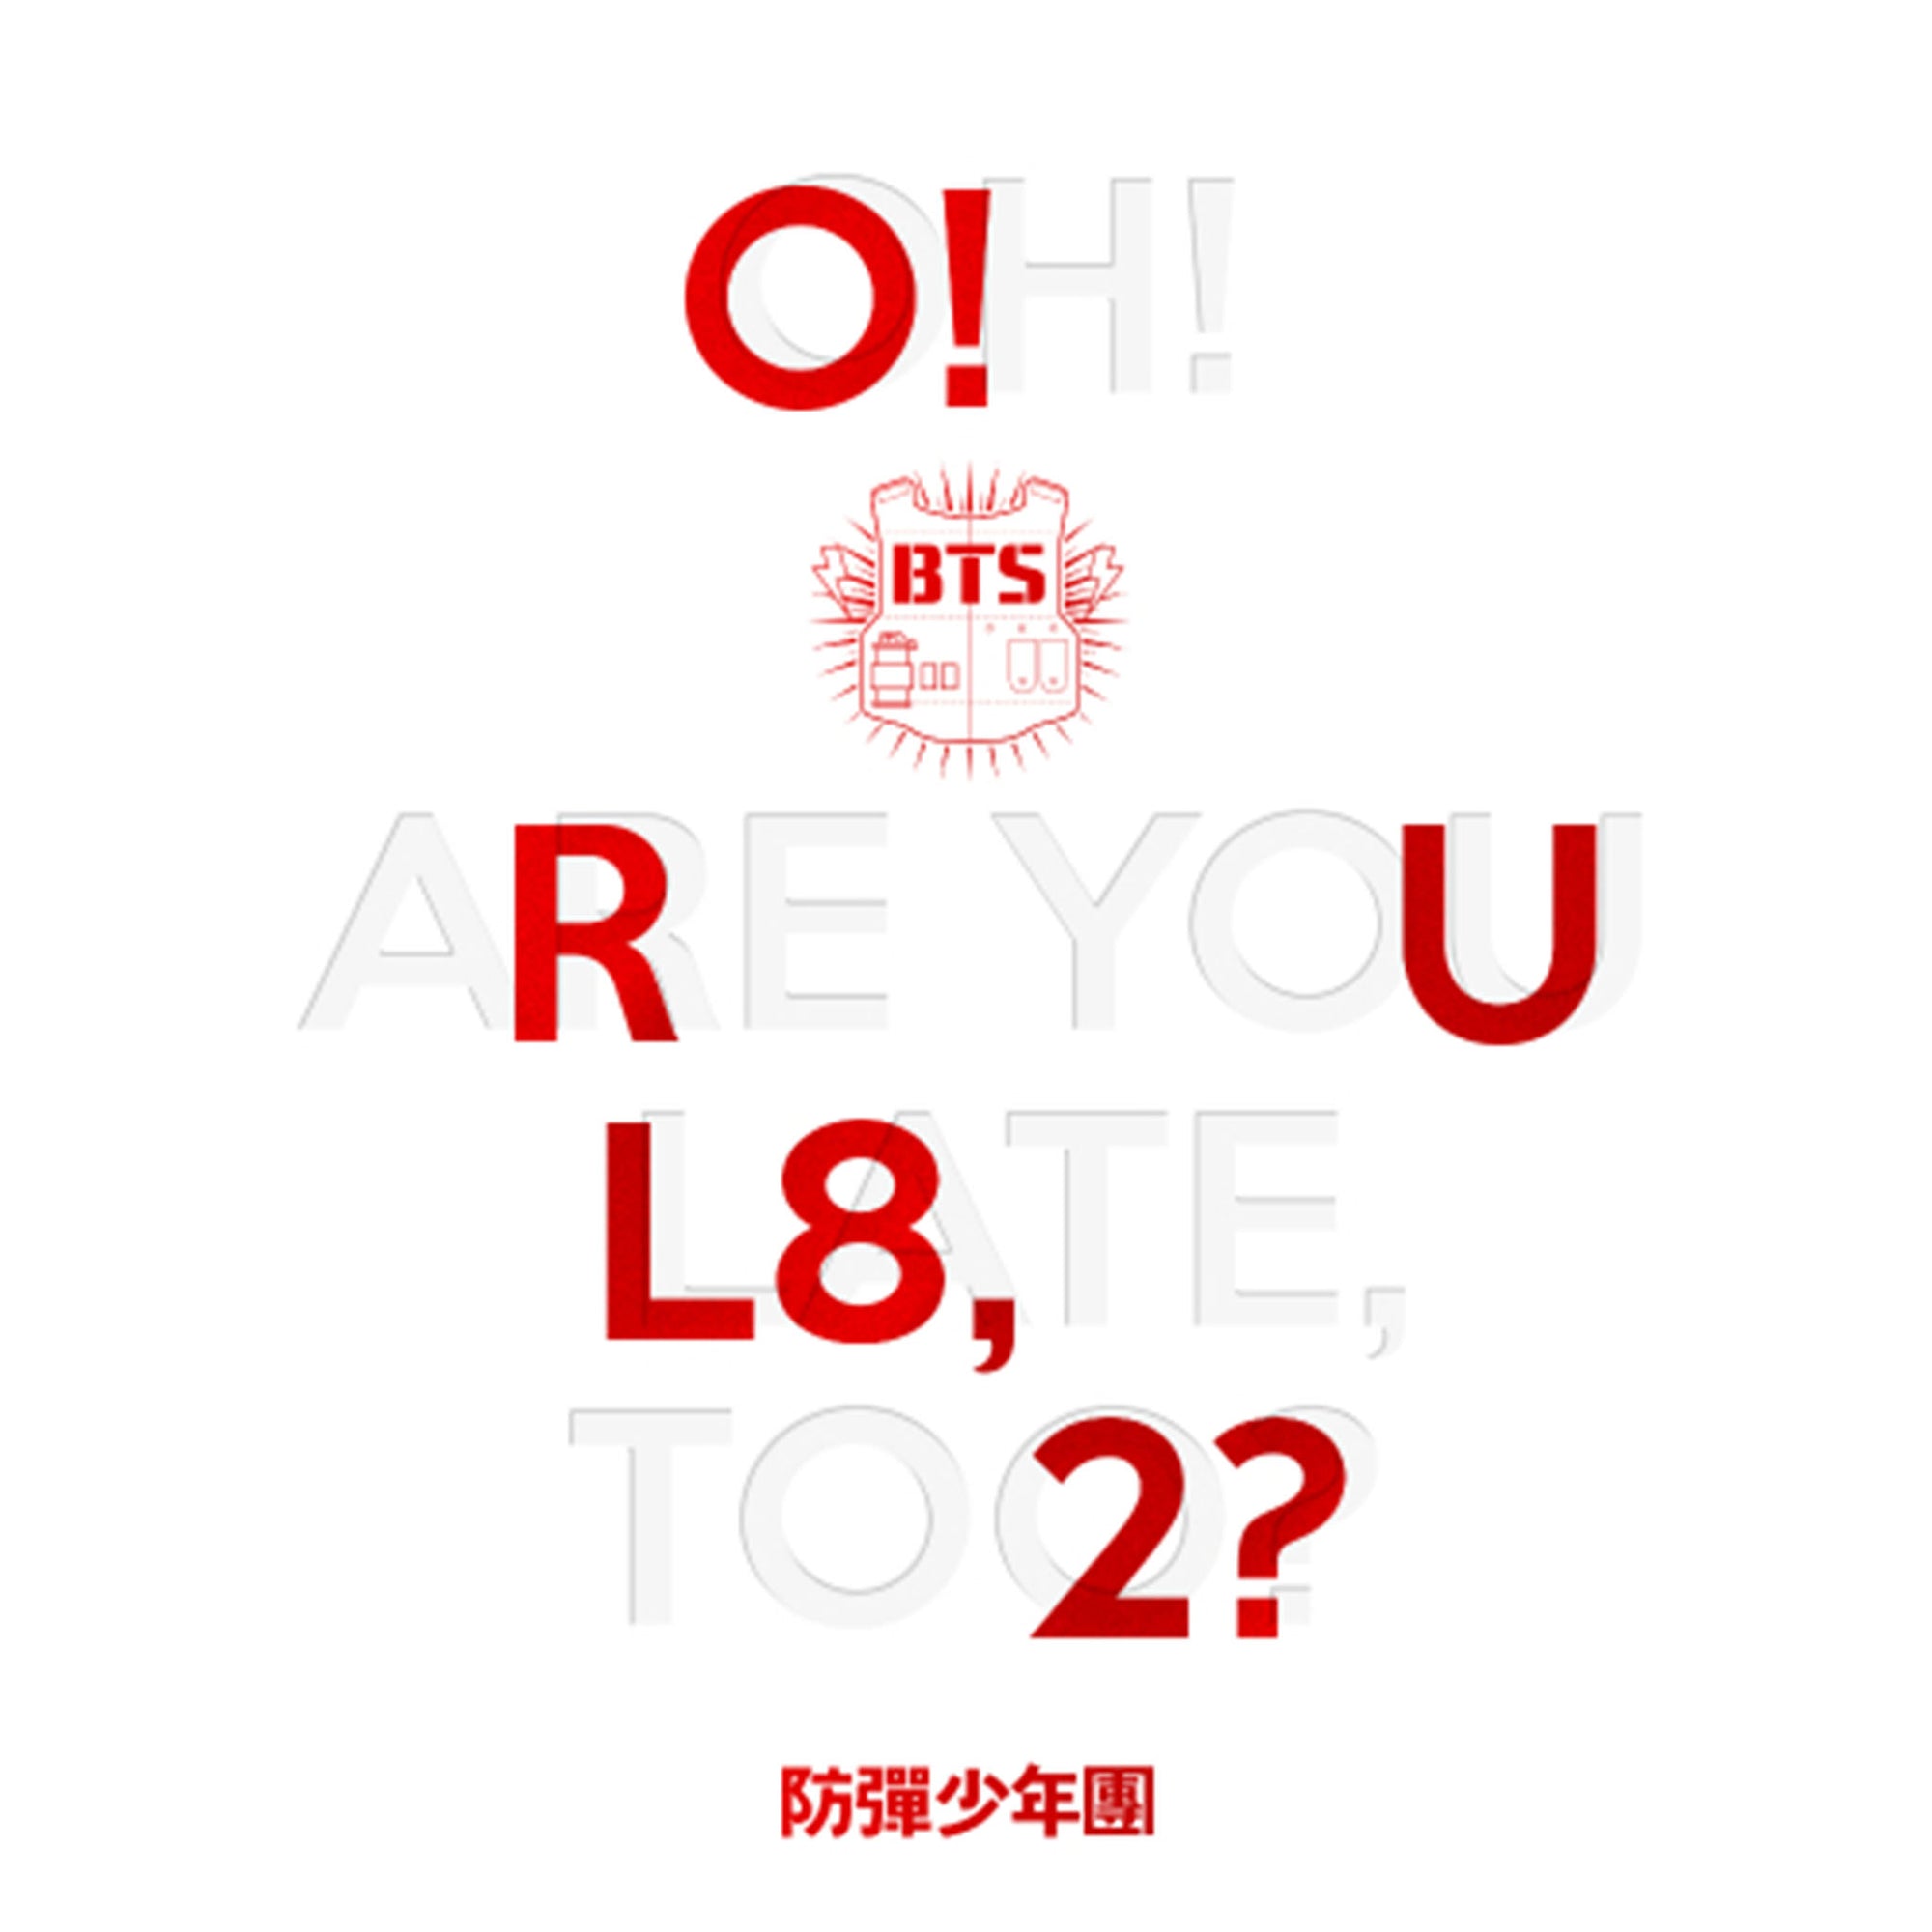 O!RUL8,2? [OH! ARE YOU LATE TOO?]